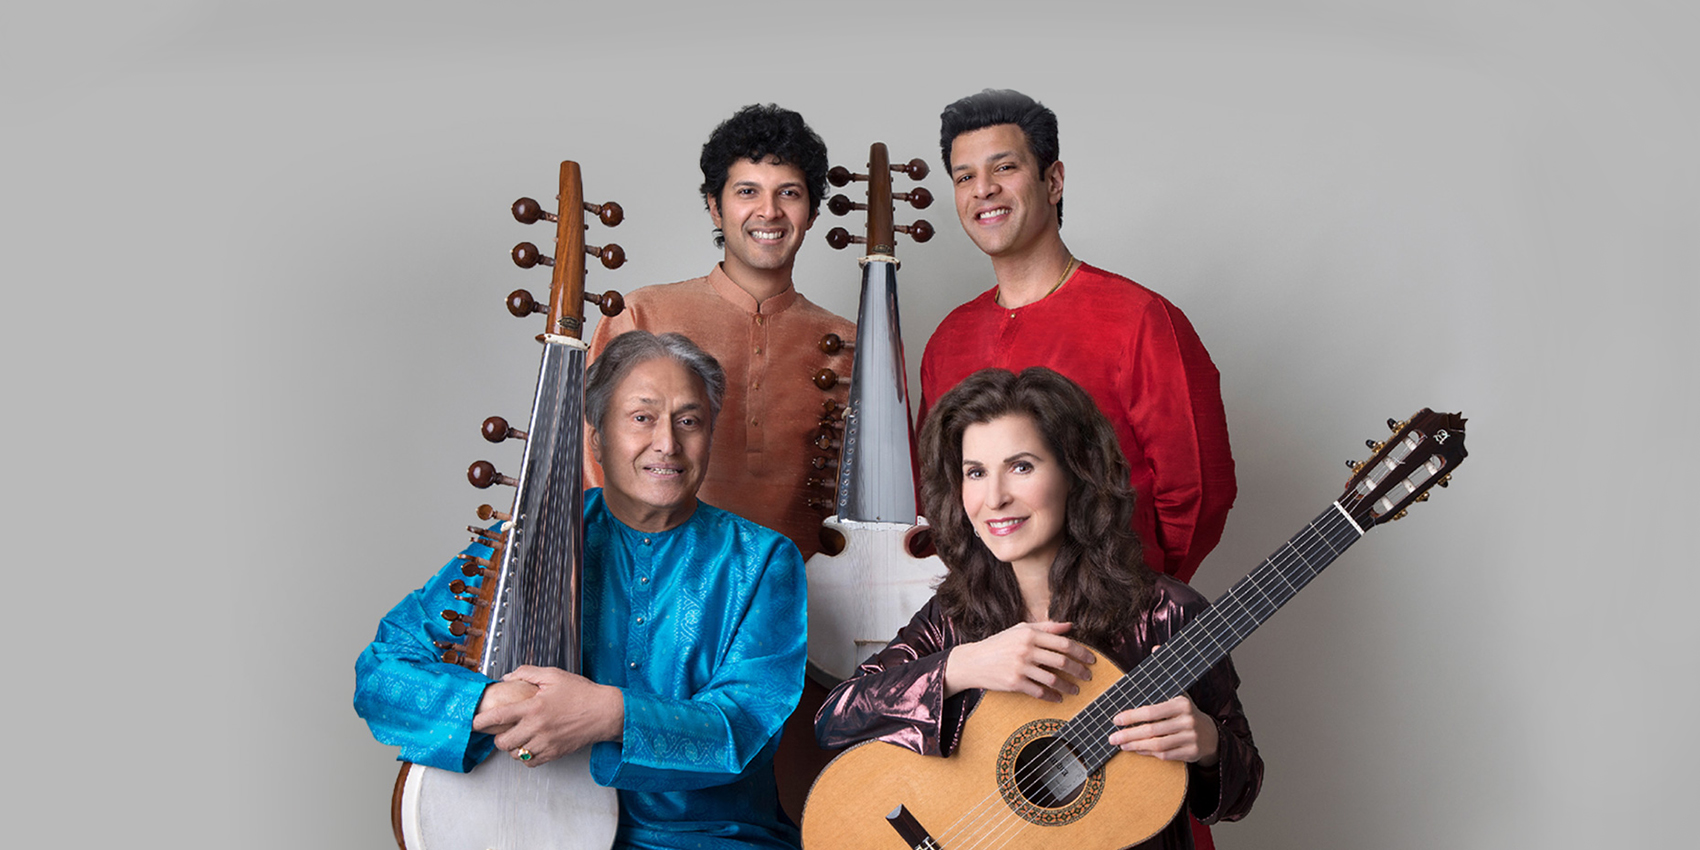 Four musicians, two sitting and two standing, holding instruments in front of a plain, gray background. 